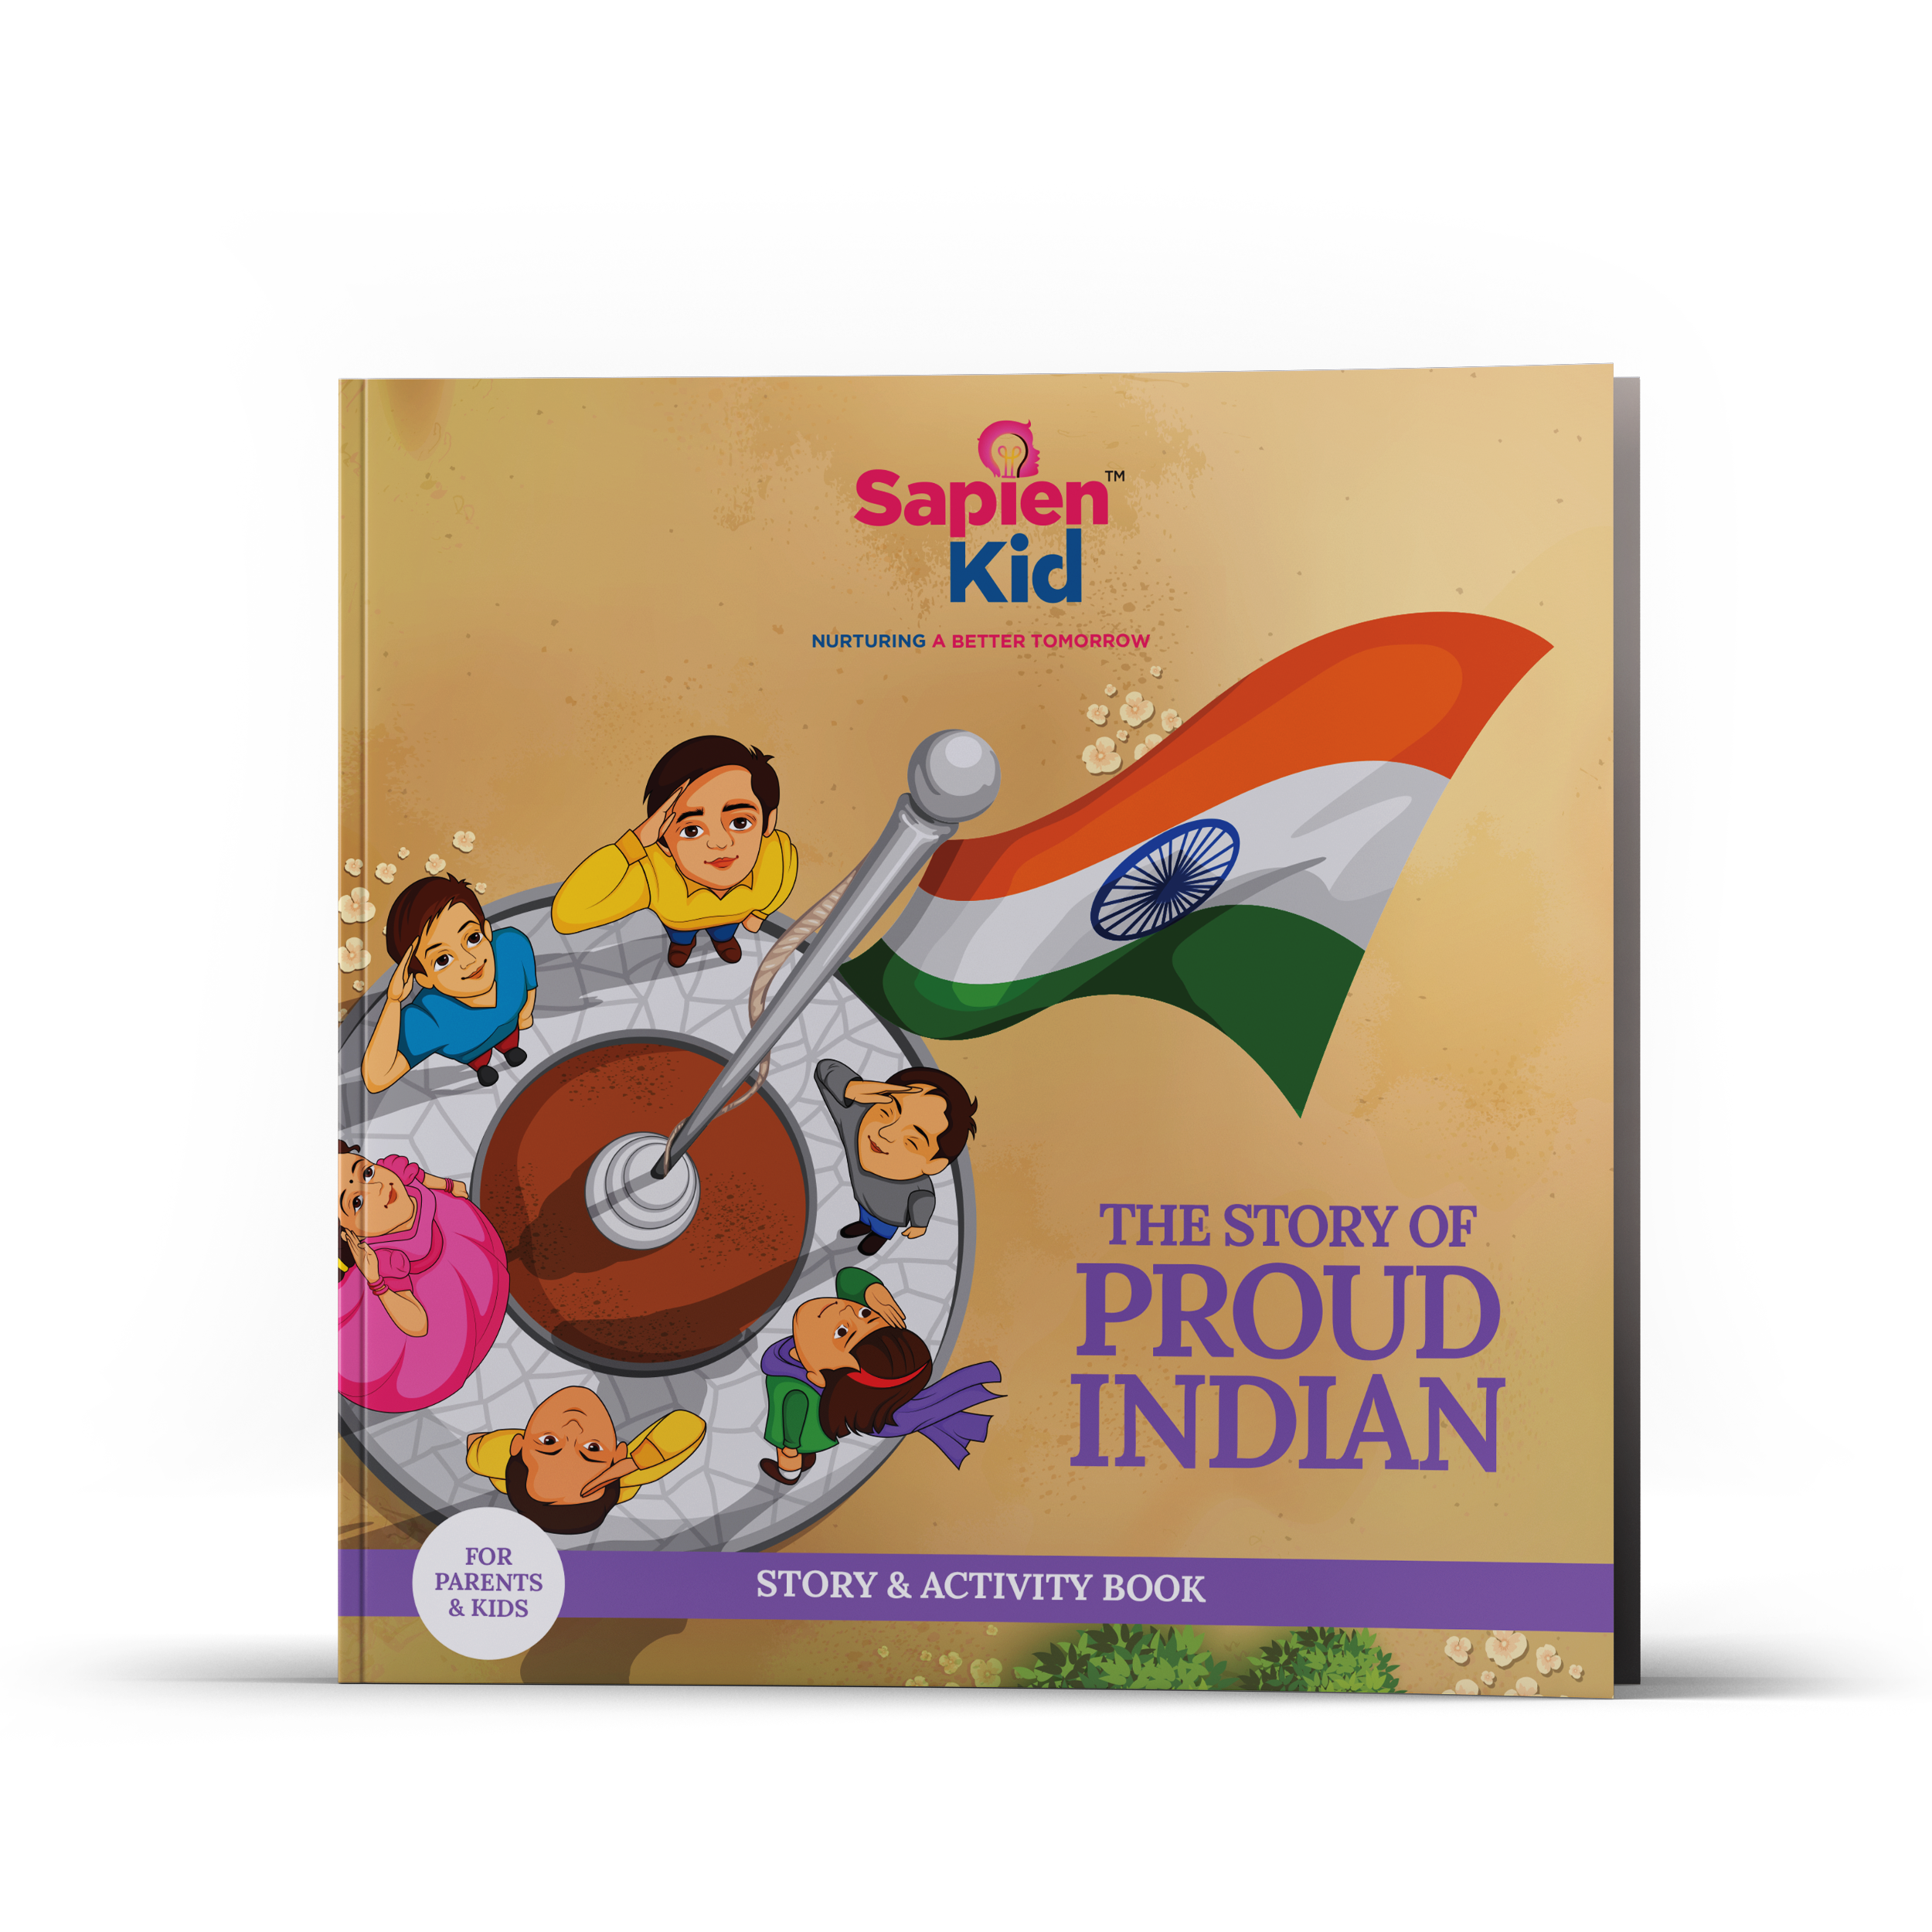 The Story of Proud Indian - Sapien Kid